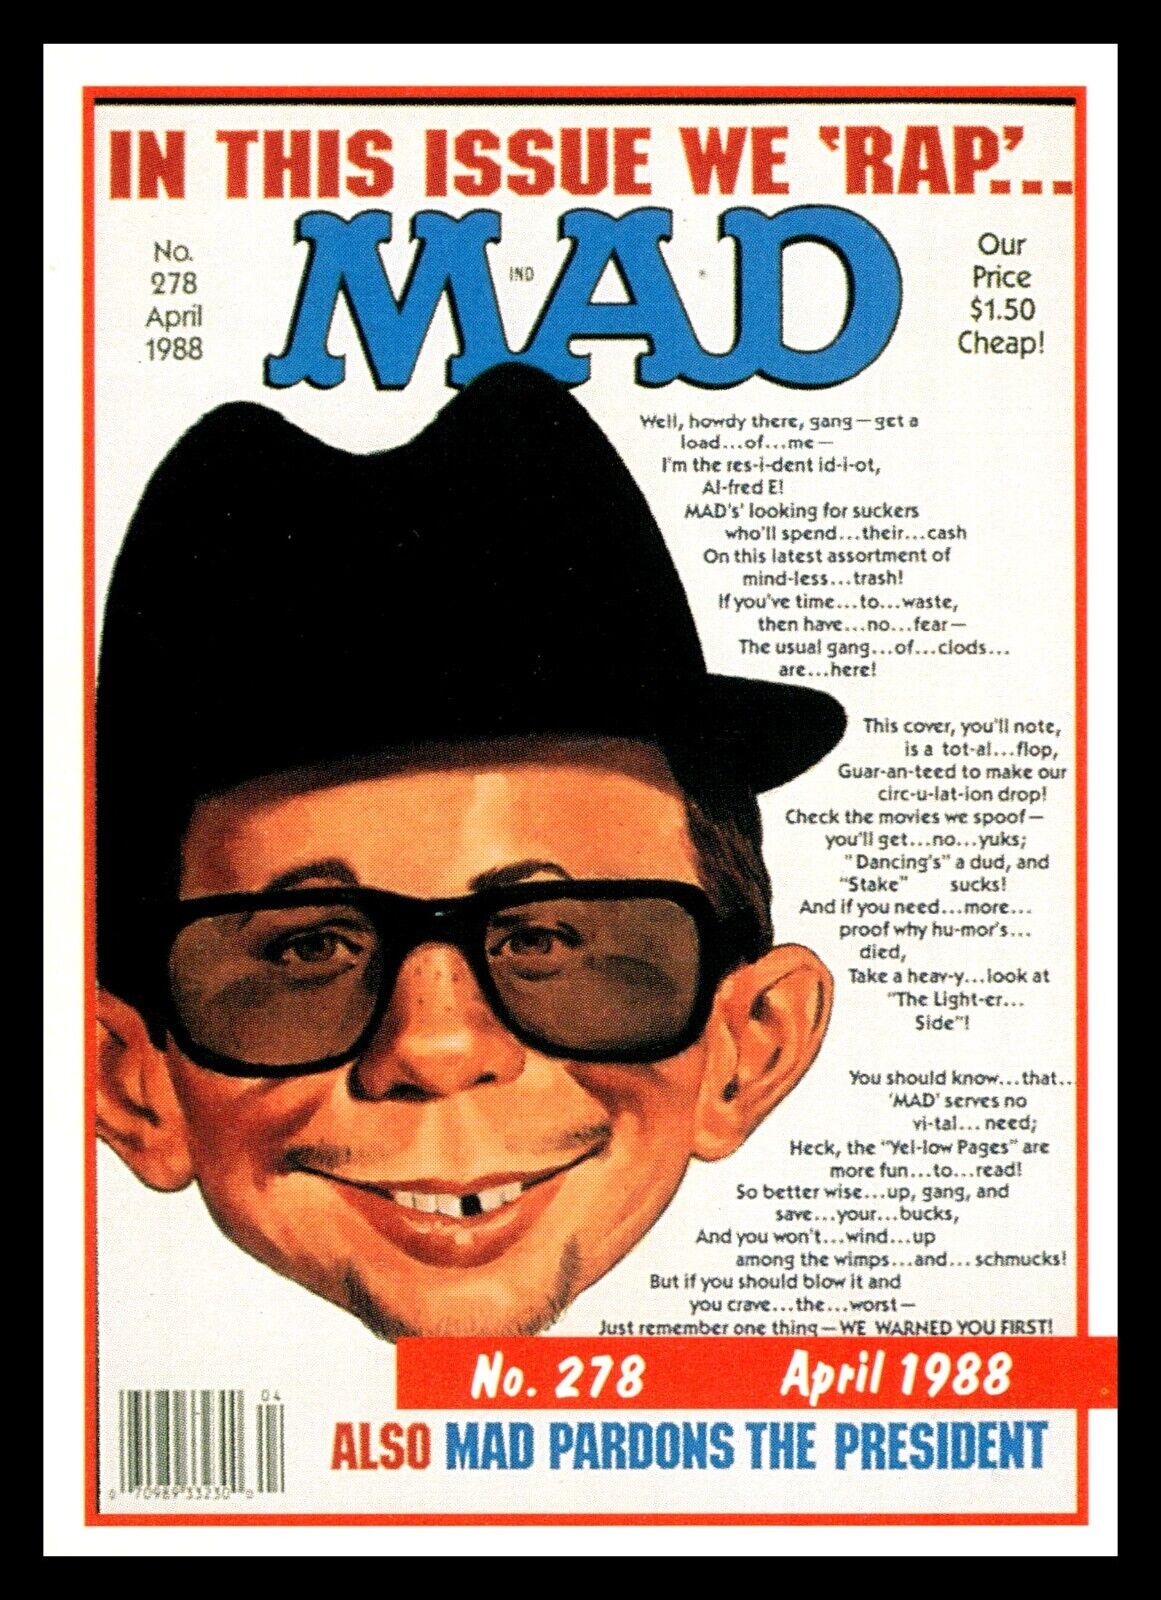 1992 LIME ROCK APRIL 1988 MAD MAGAZINE TRADING CARD #273 This Issue We Will Rap